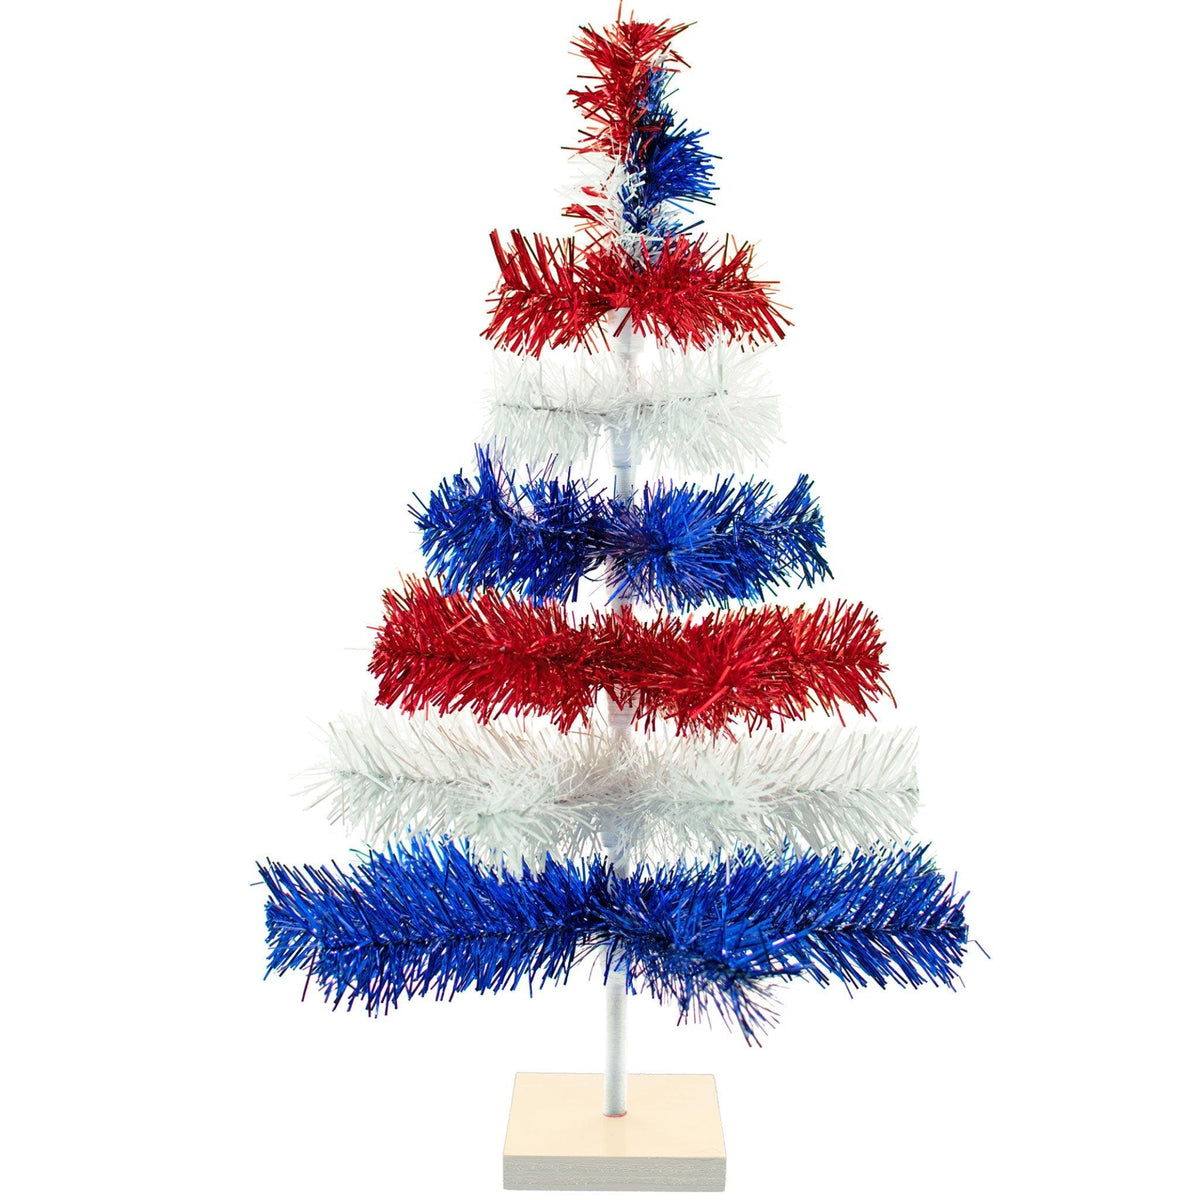 18in tall Red, White, and Blue Layered Tinsel Christmas Trees made by hand in the USA.  Decorate for the holidays with retro 4th of July-themed Trees and start creating your centerpiece now.  Shop for more at leedisplay.com